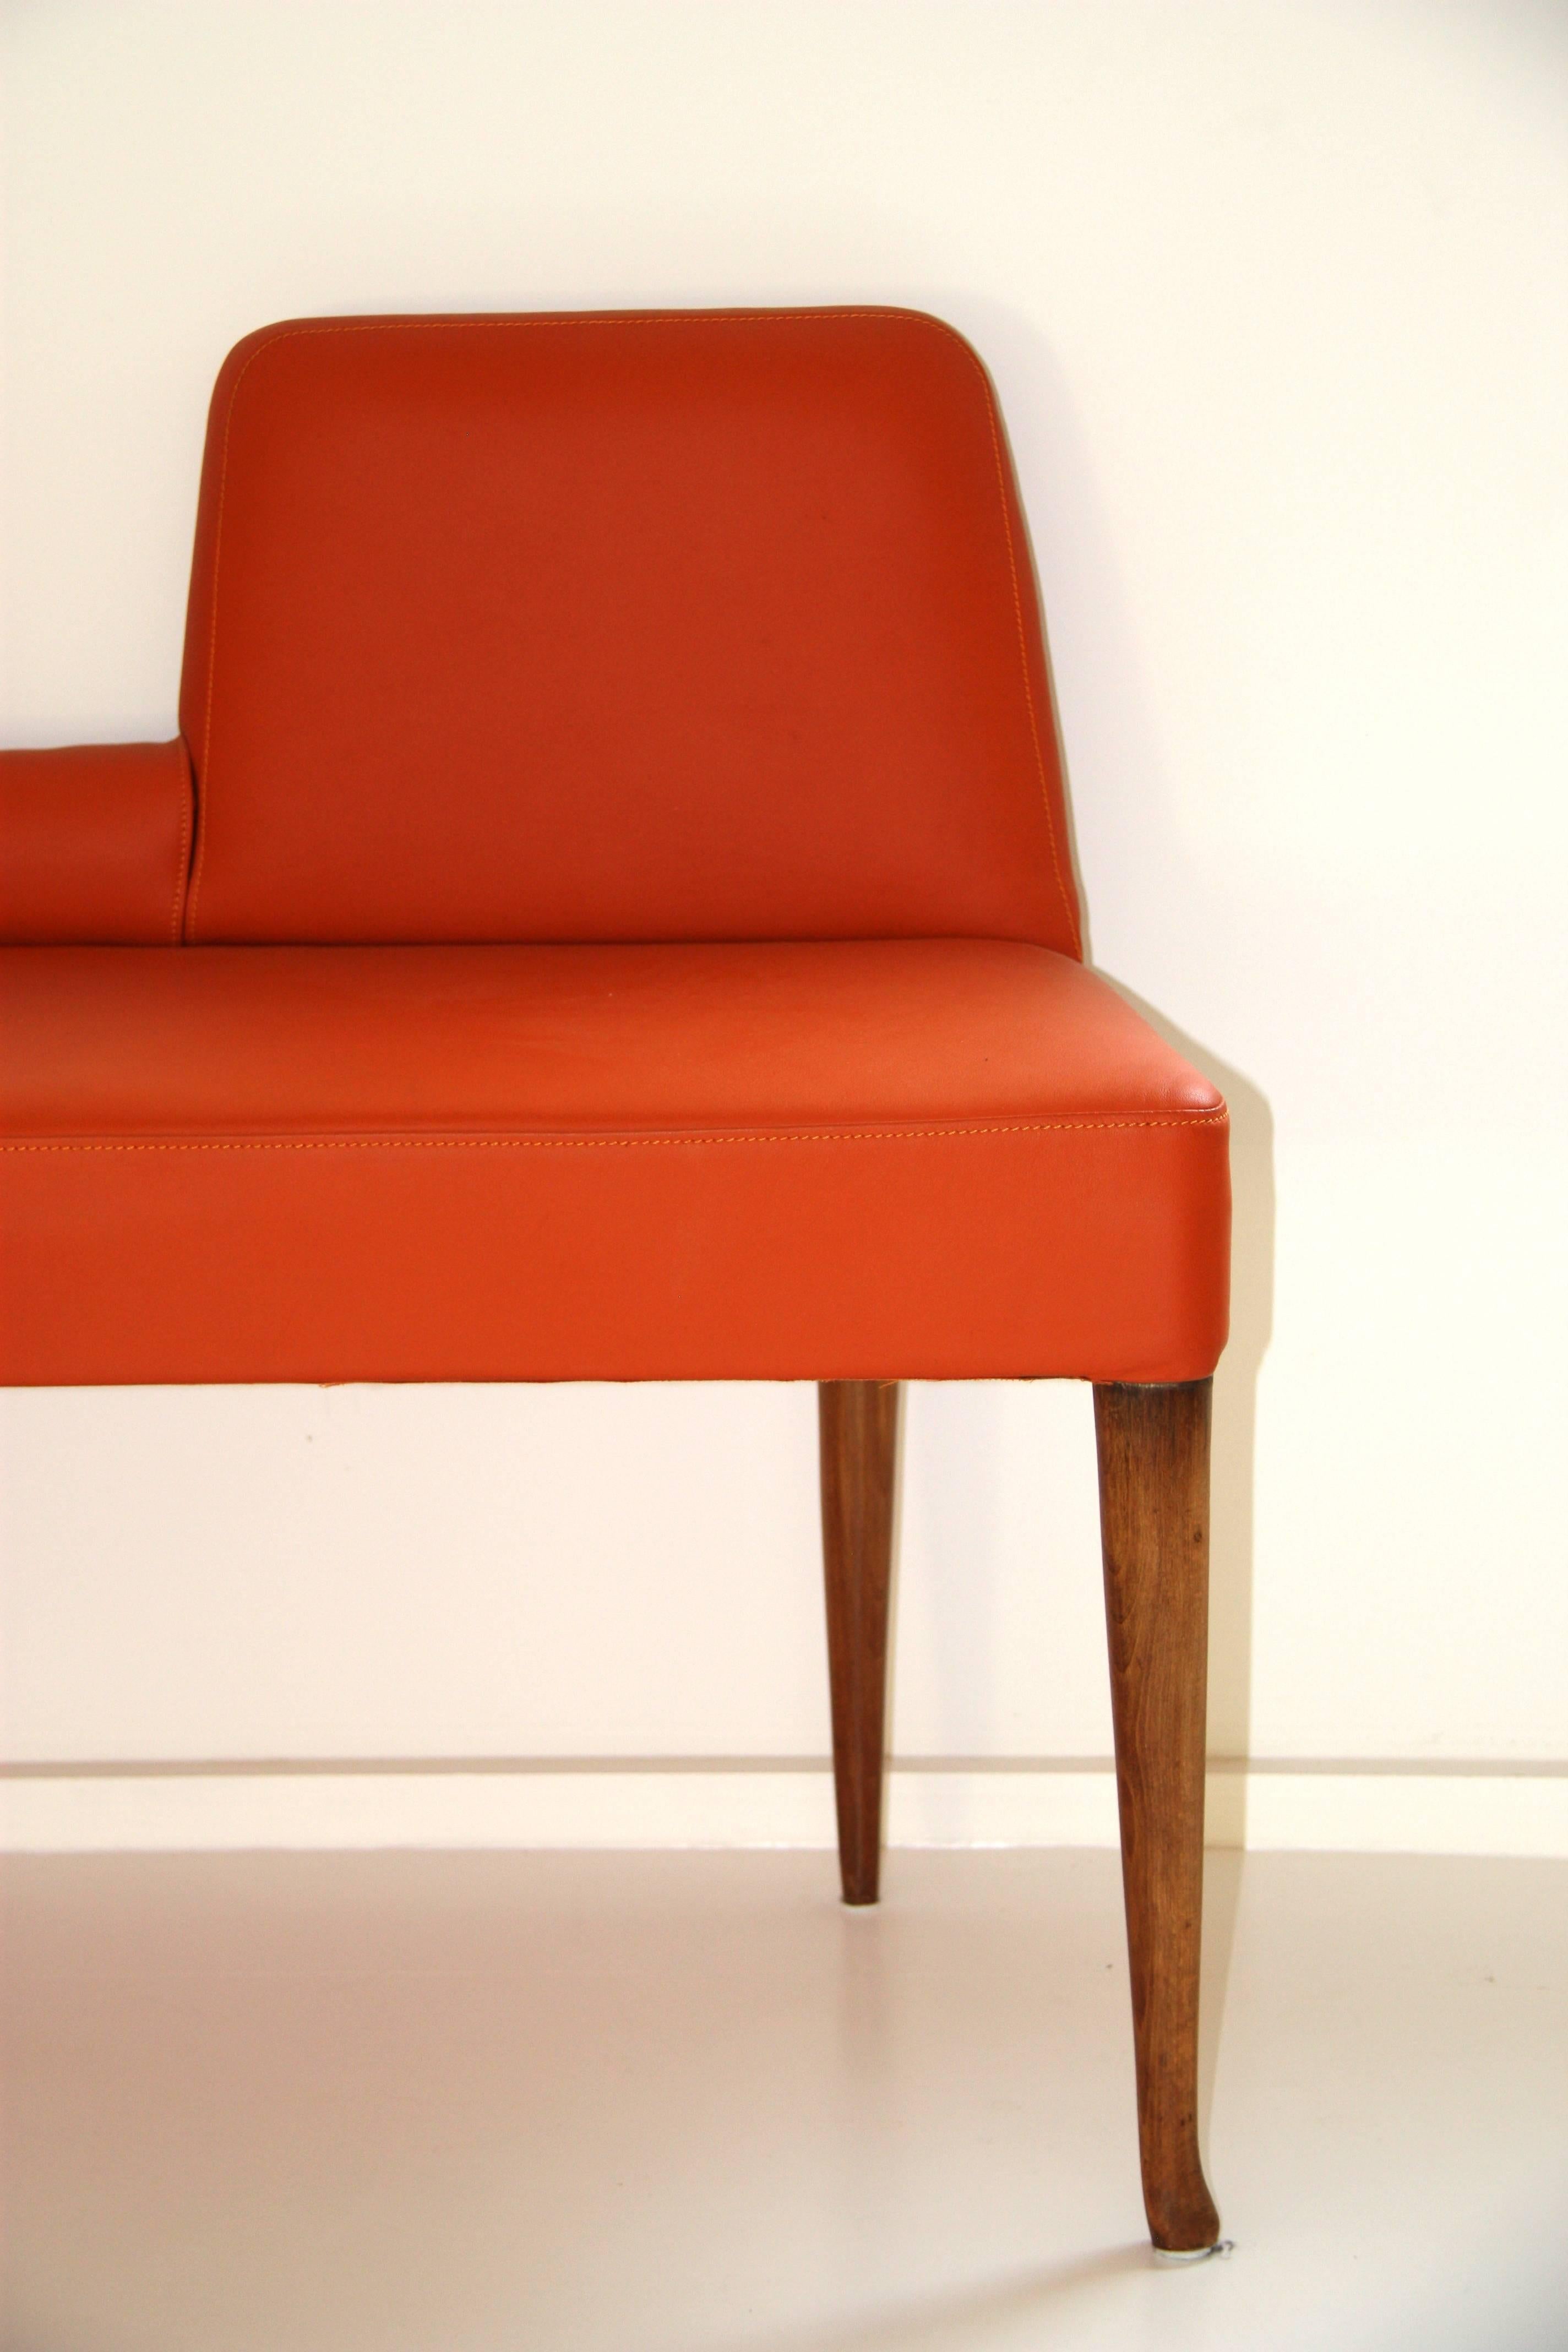 Mid-20th Century Vintage Italian Orange Leather Bench with Low Back, circa 1960 For Sale